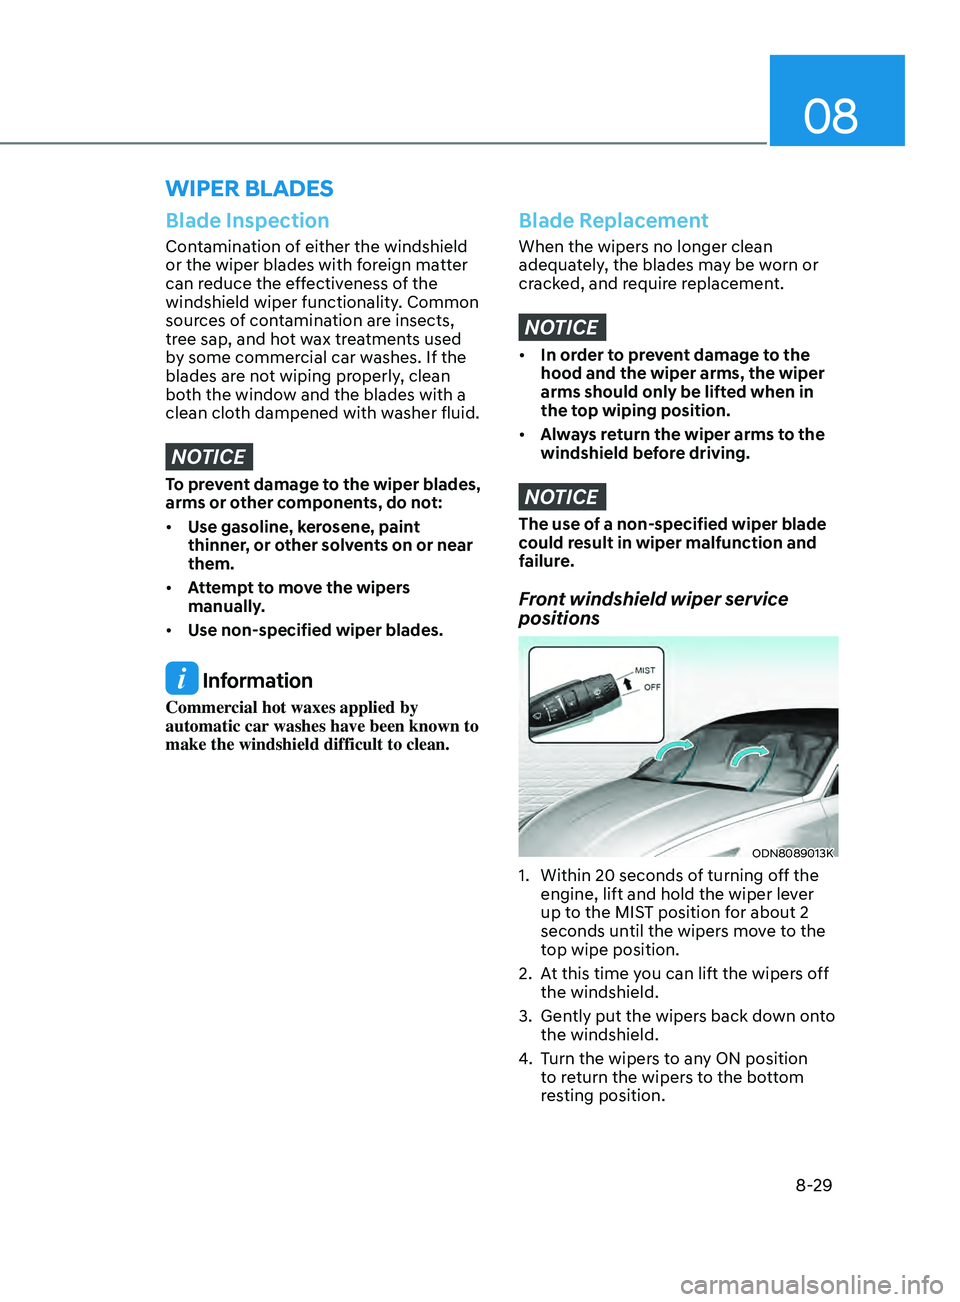 HYUNDAI SONATA 2021  Owners Manual 08
8-29
wipEr BladES
Blade Inspection
Contamination of either the windshield 
or the wiper blades with foreign matter 
can reduce the effectiveness of the 
windshield wiper functionality. Common 
sour